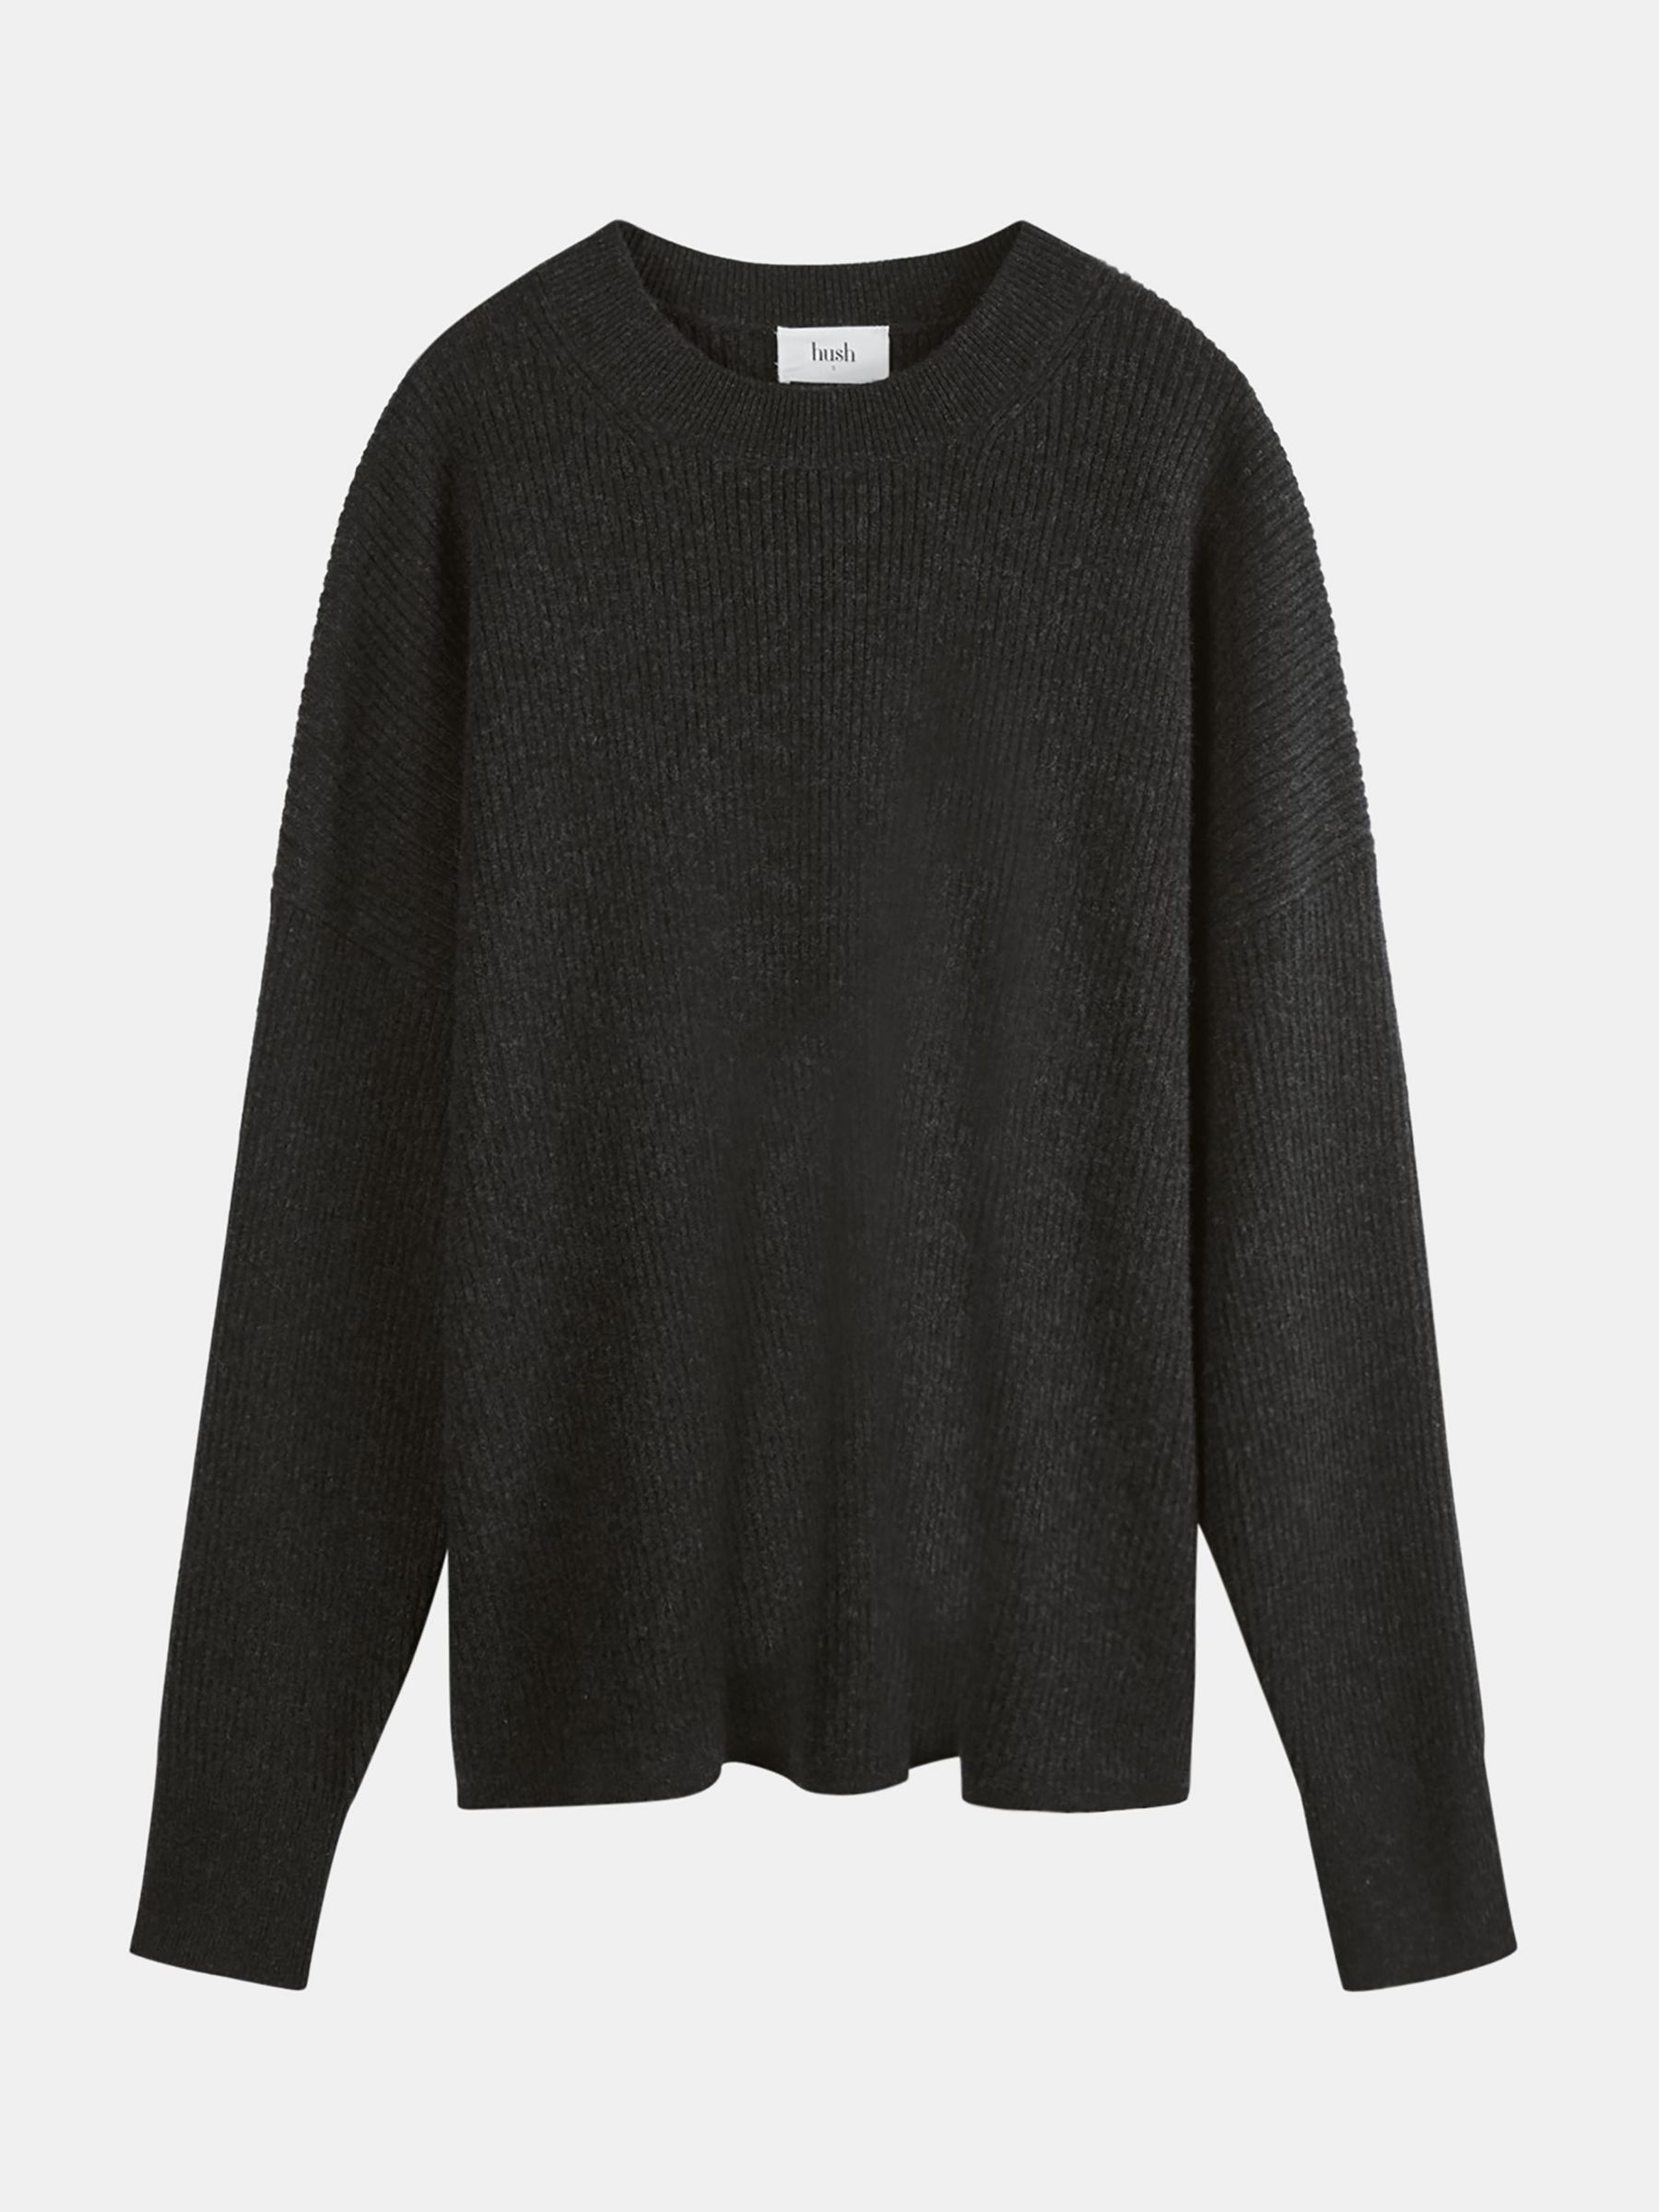 HUSH Mae Relaxed Cashmere Lounge Top, Charcoal Marl at John Lewis ...